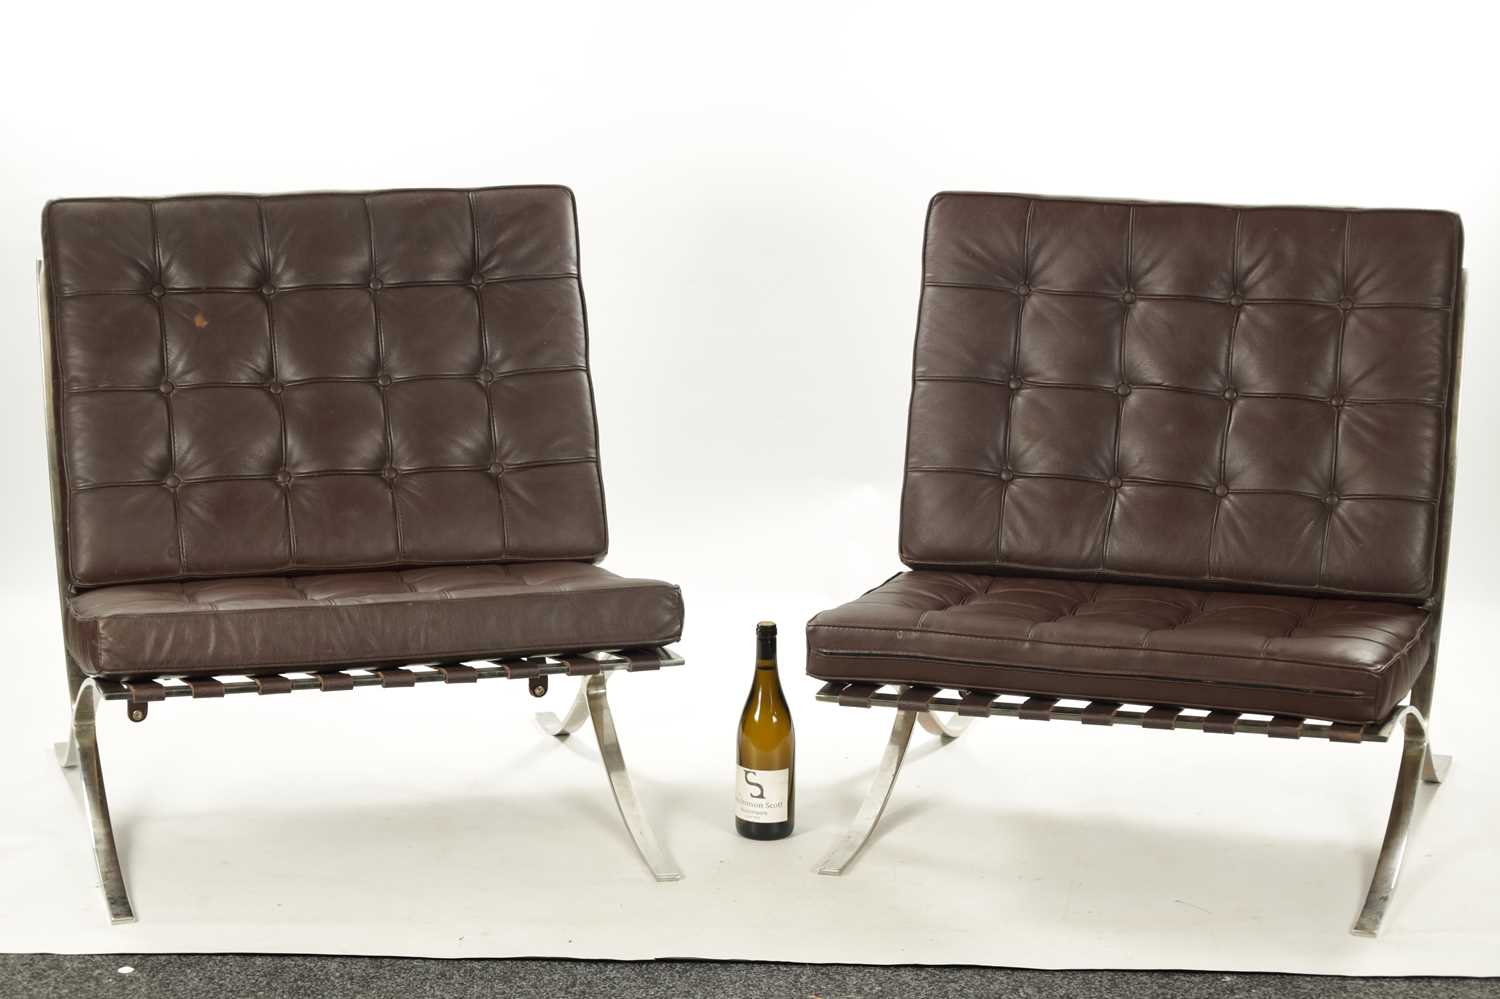 A PAIR OF 20TH CENTURY BARCELONA CHROME AND LEATHER UPHOLSTERED CHAIRS - Image 2 of 5